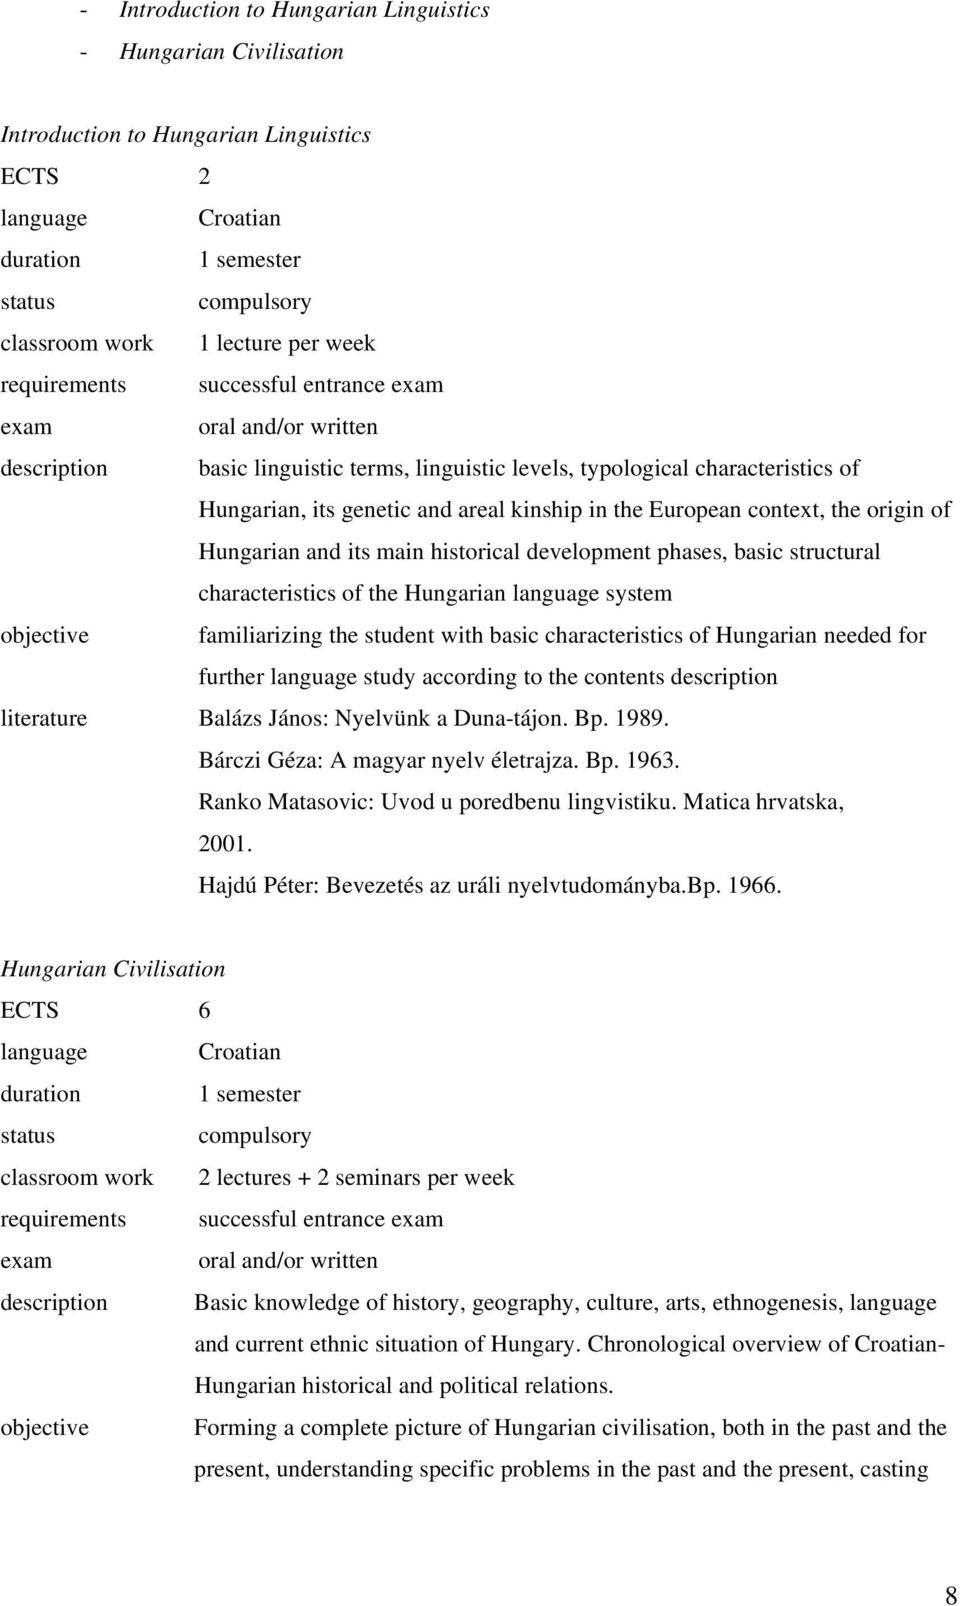 origin of Hungarian and its main historical development phases, basic structural characteristics of the Hungarian language system objective familiarizing the student with basic characteristics of